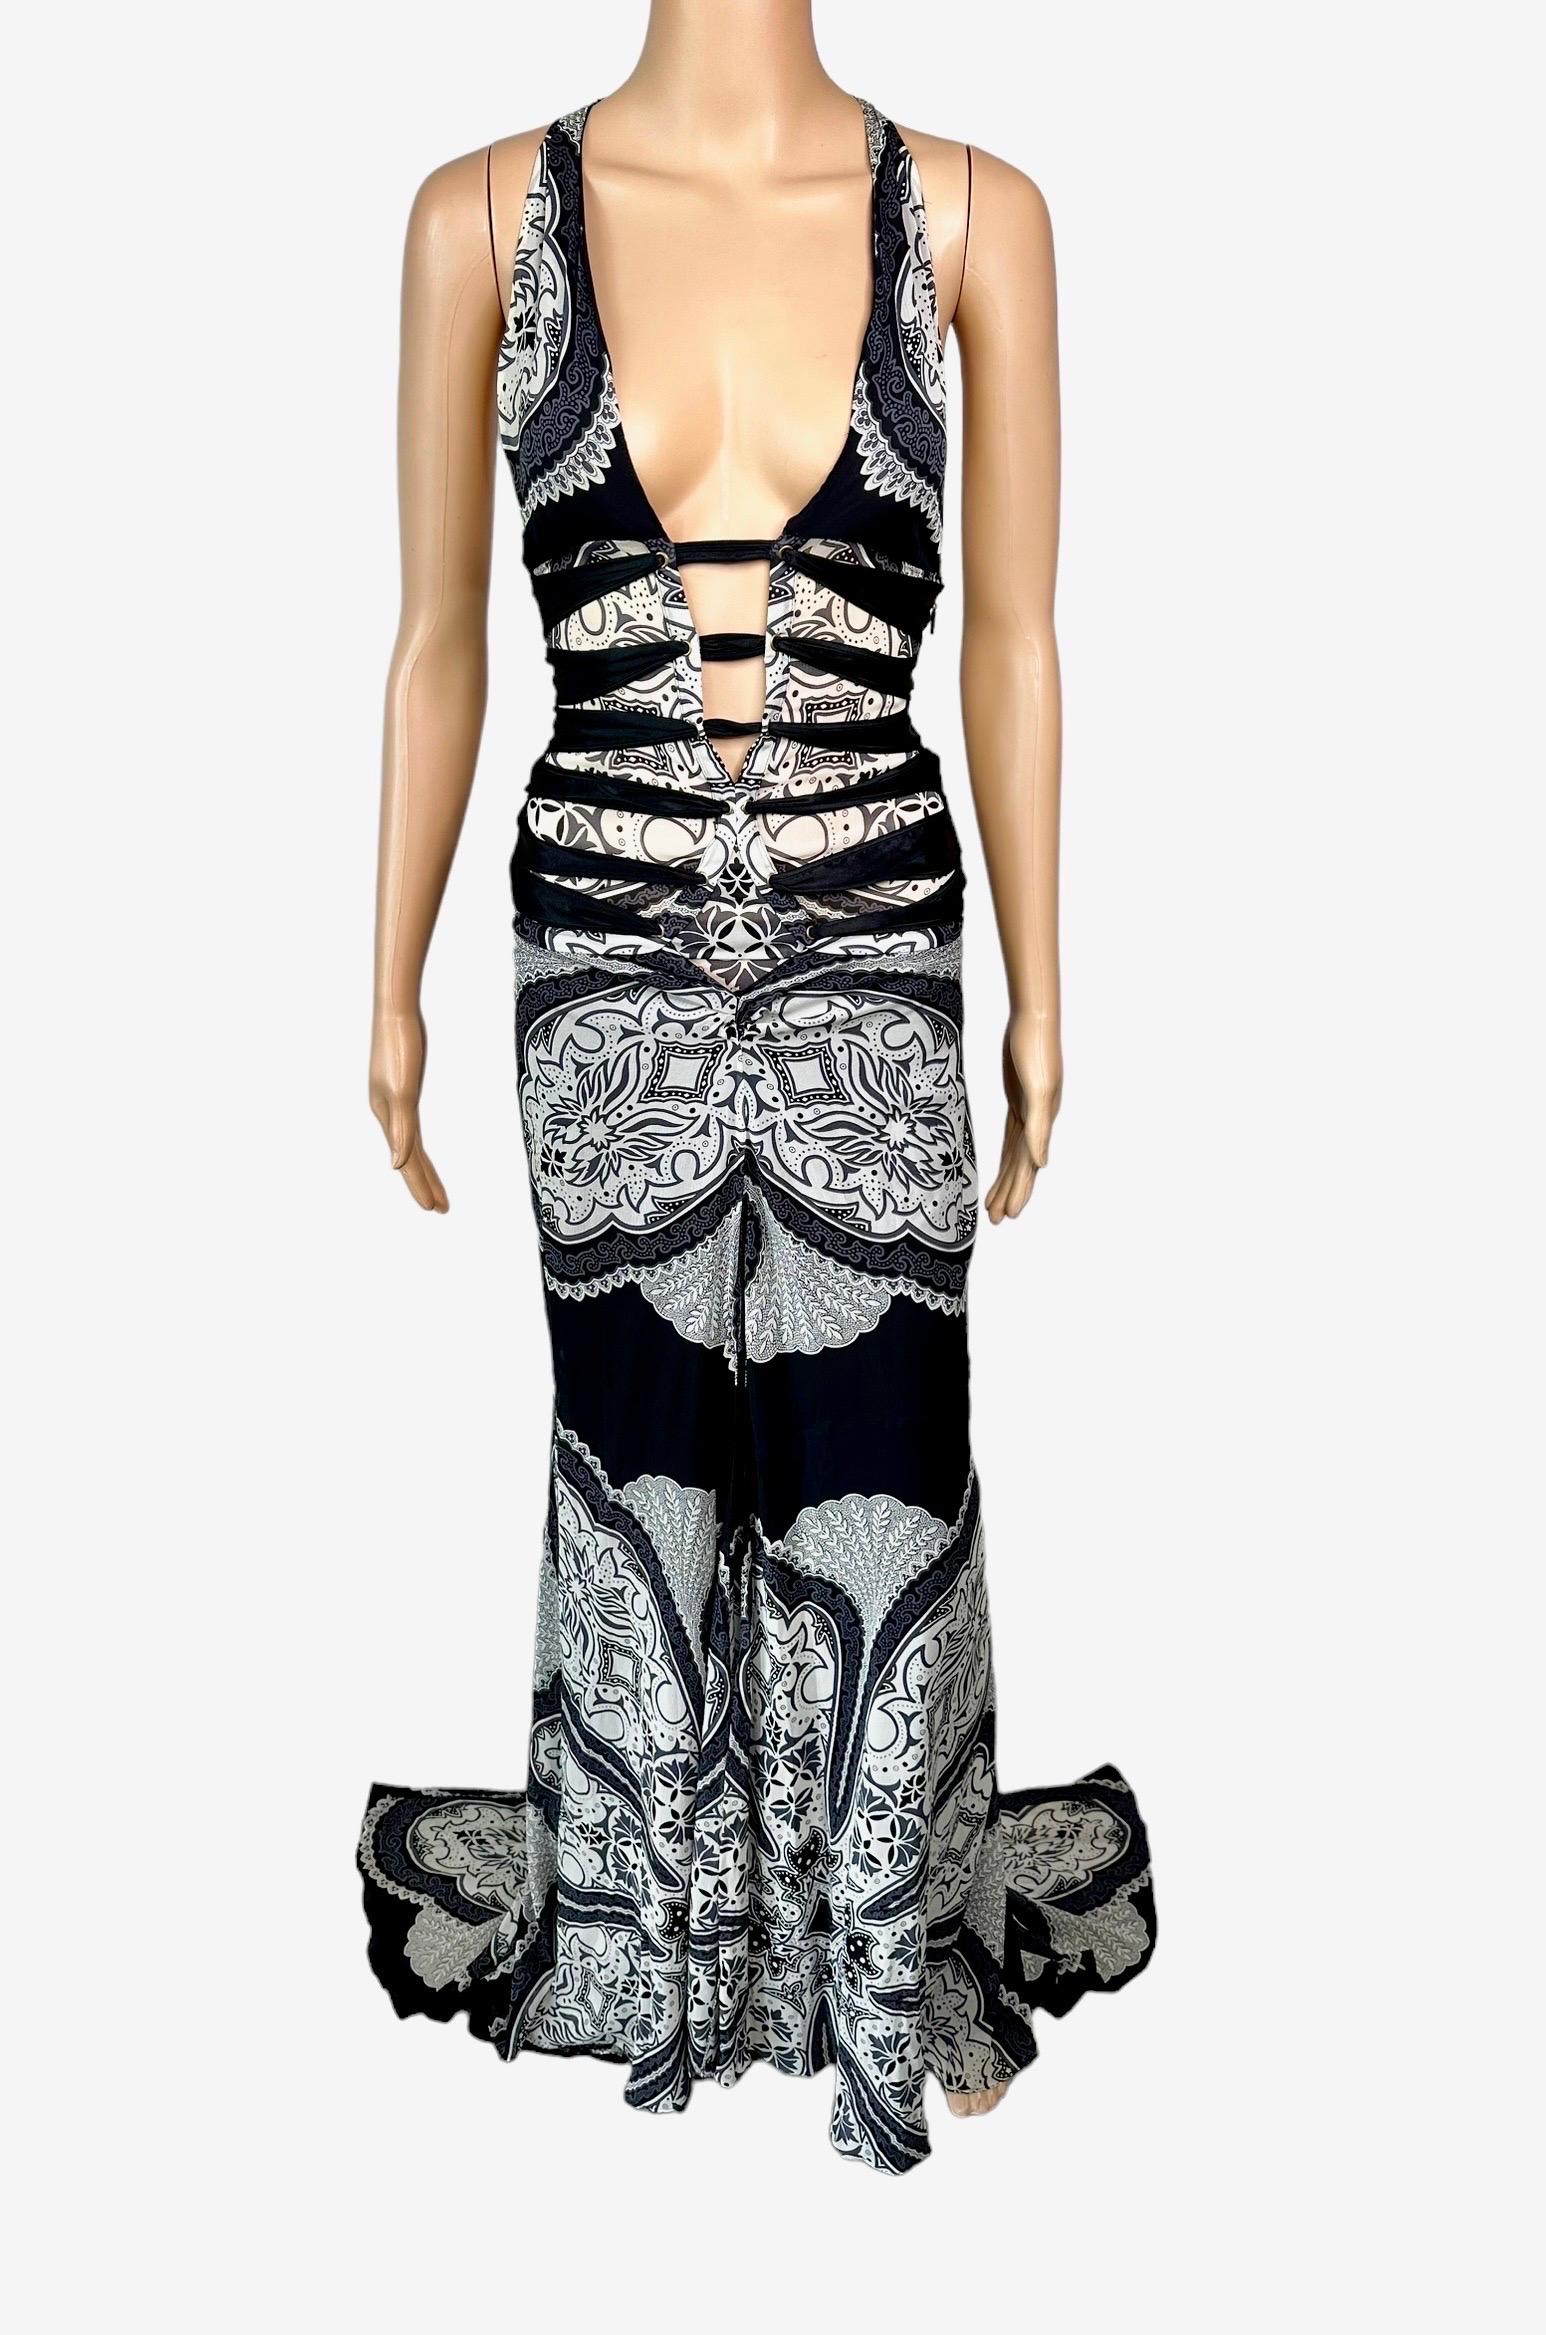 Tom Ford for Gucci Cruise 2004 Plunging Cutout Strappy Silk Evening Dress Gown For Sale 1